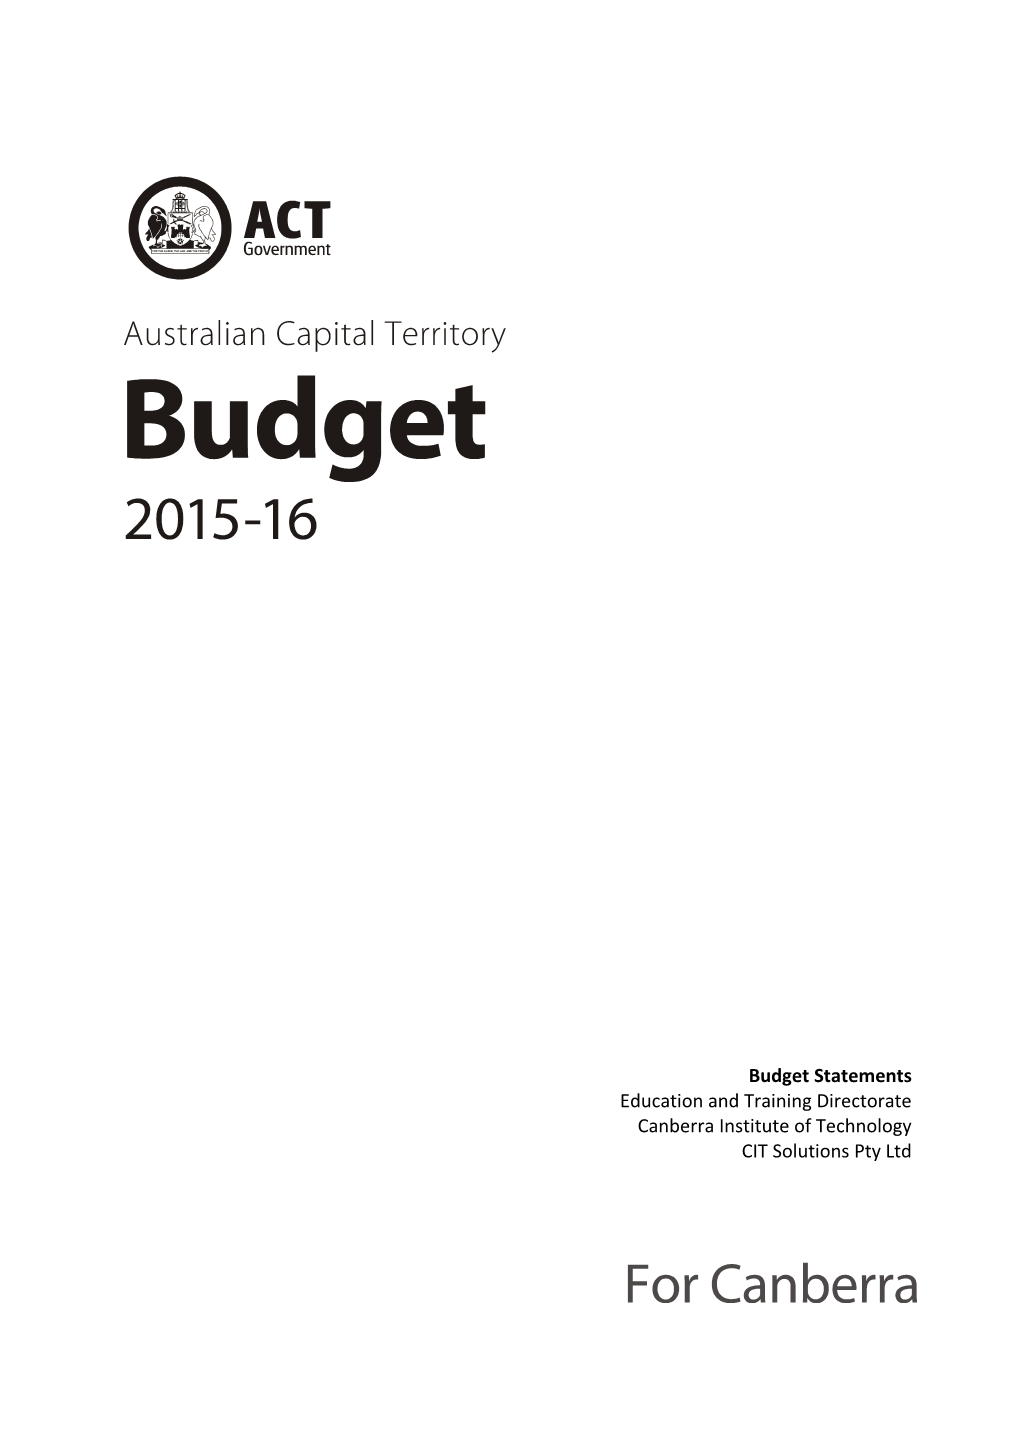 2015-16 Education and Training Budget Statement